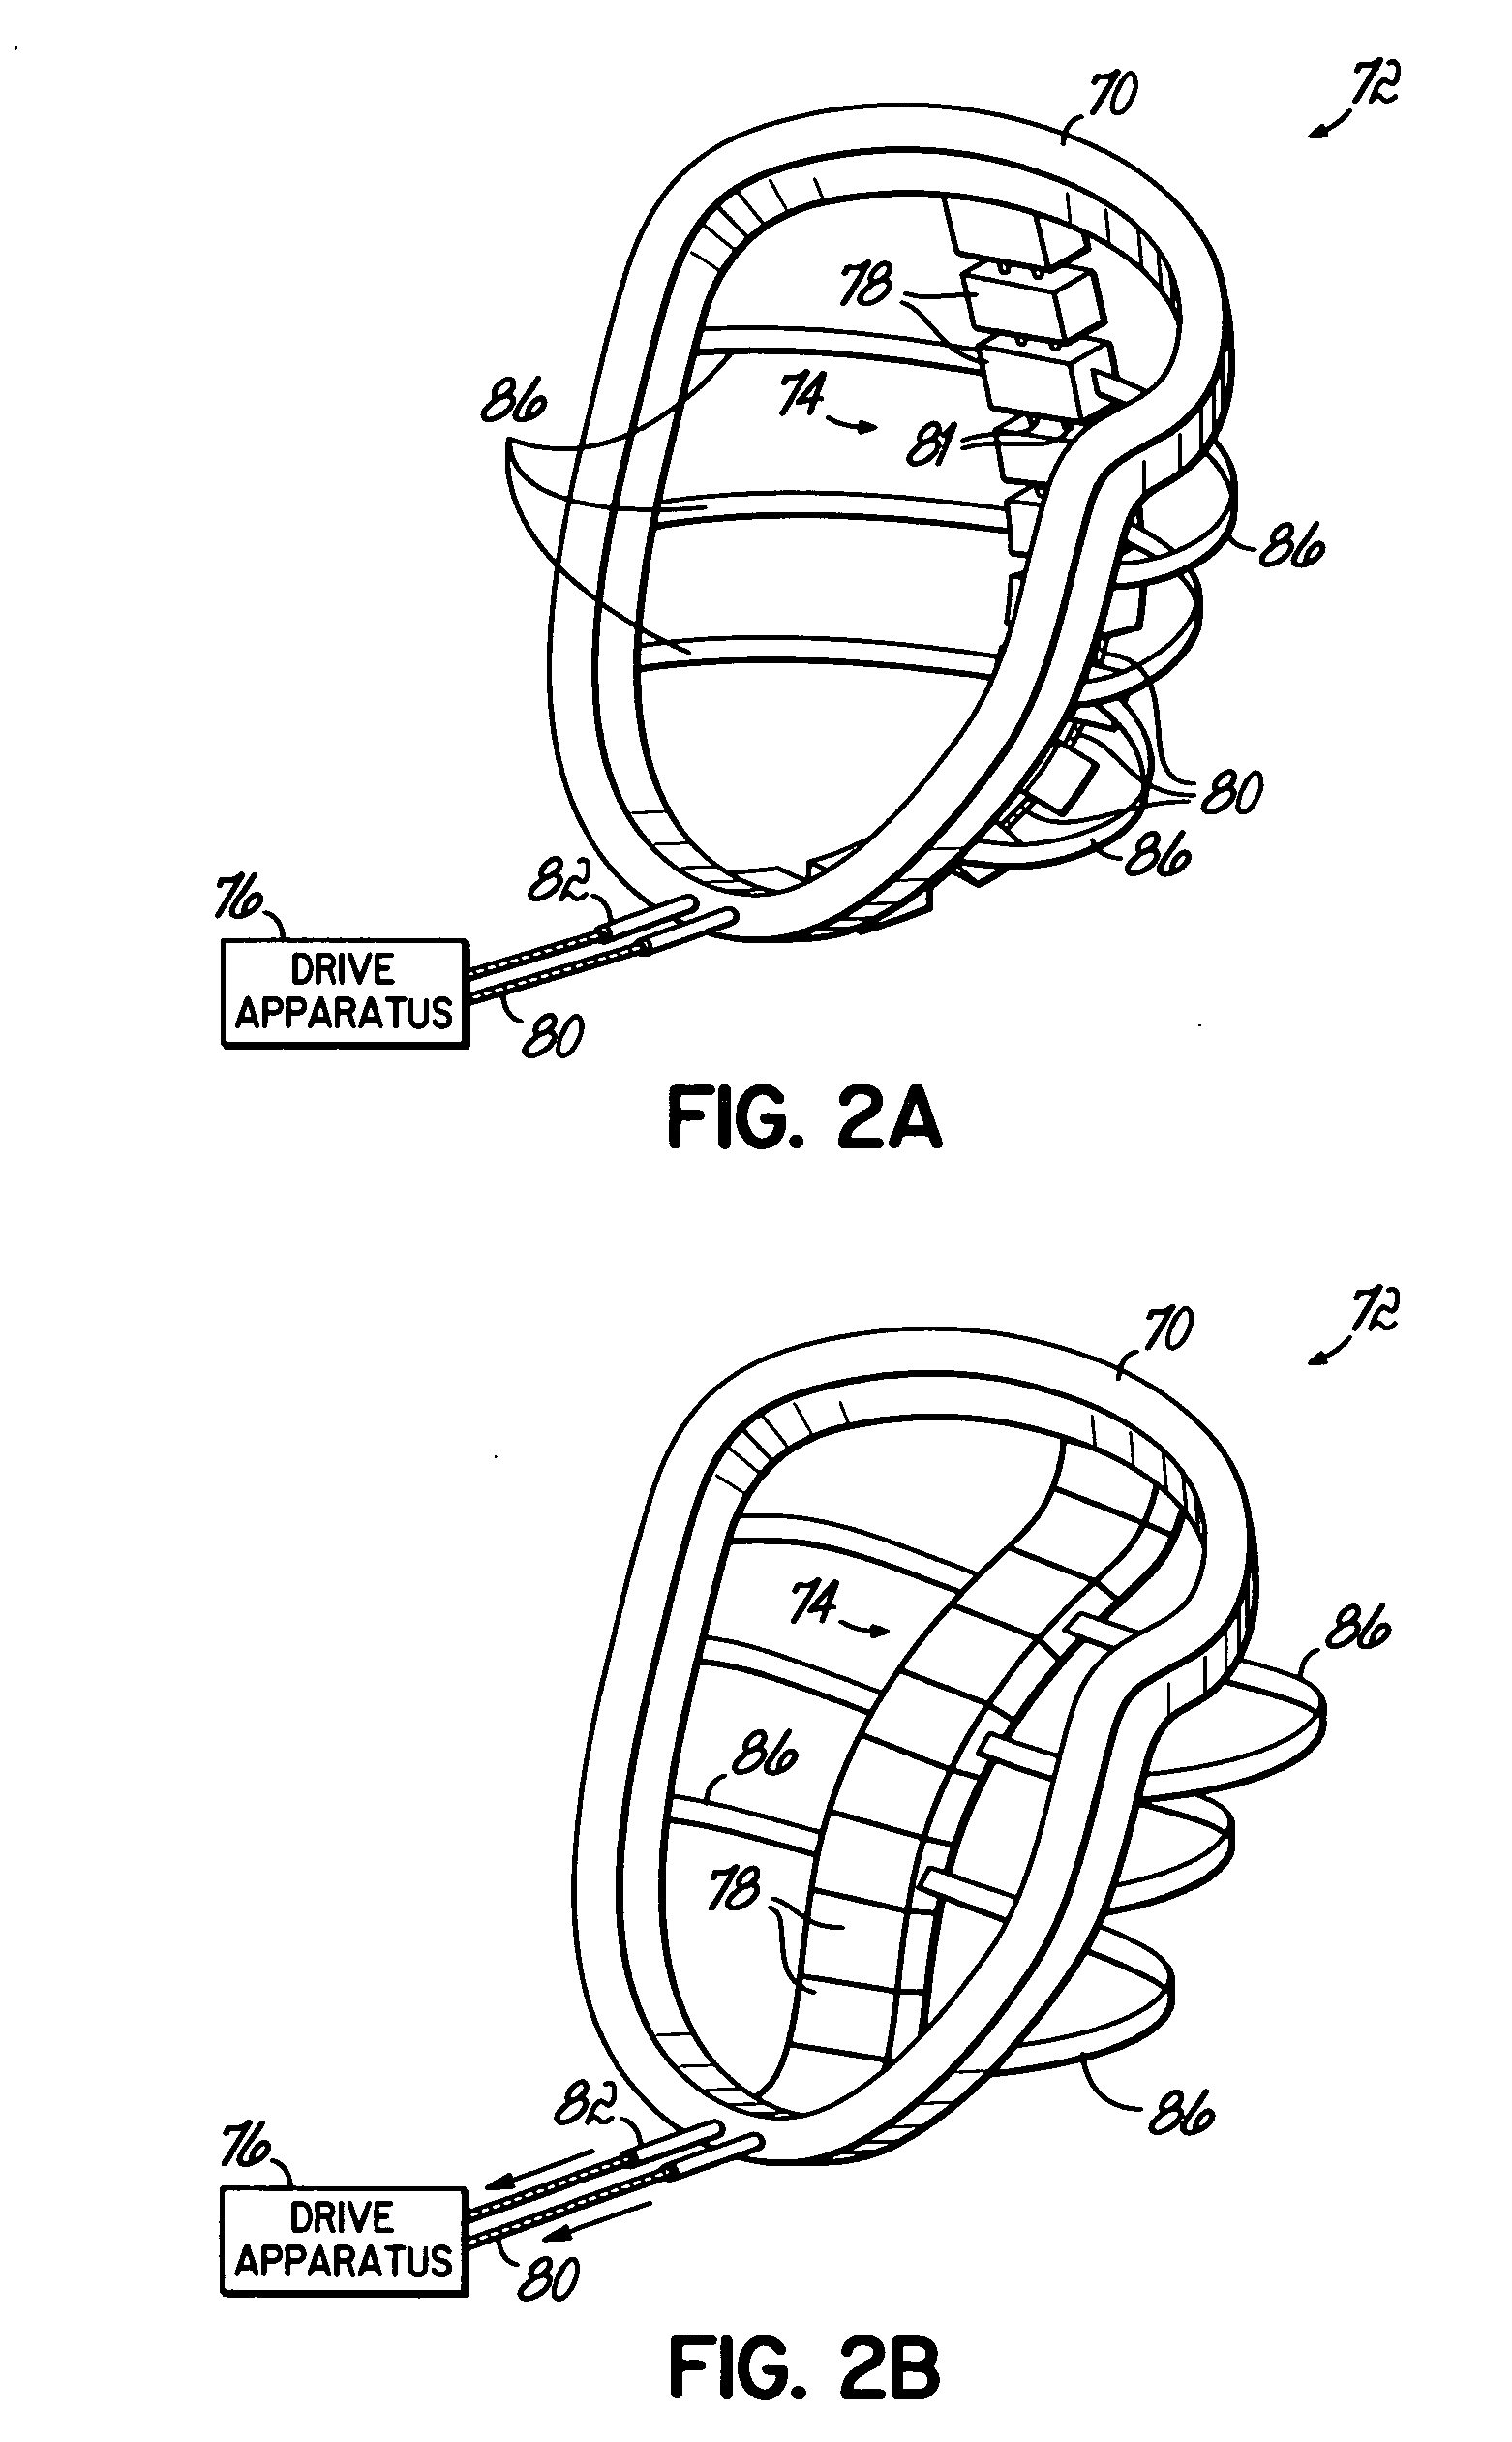 Heart wall actuation system for the natural heart with shape limiting elements